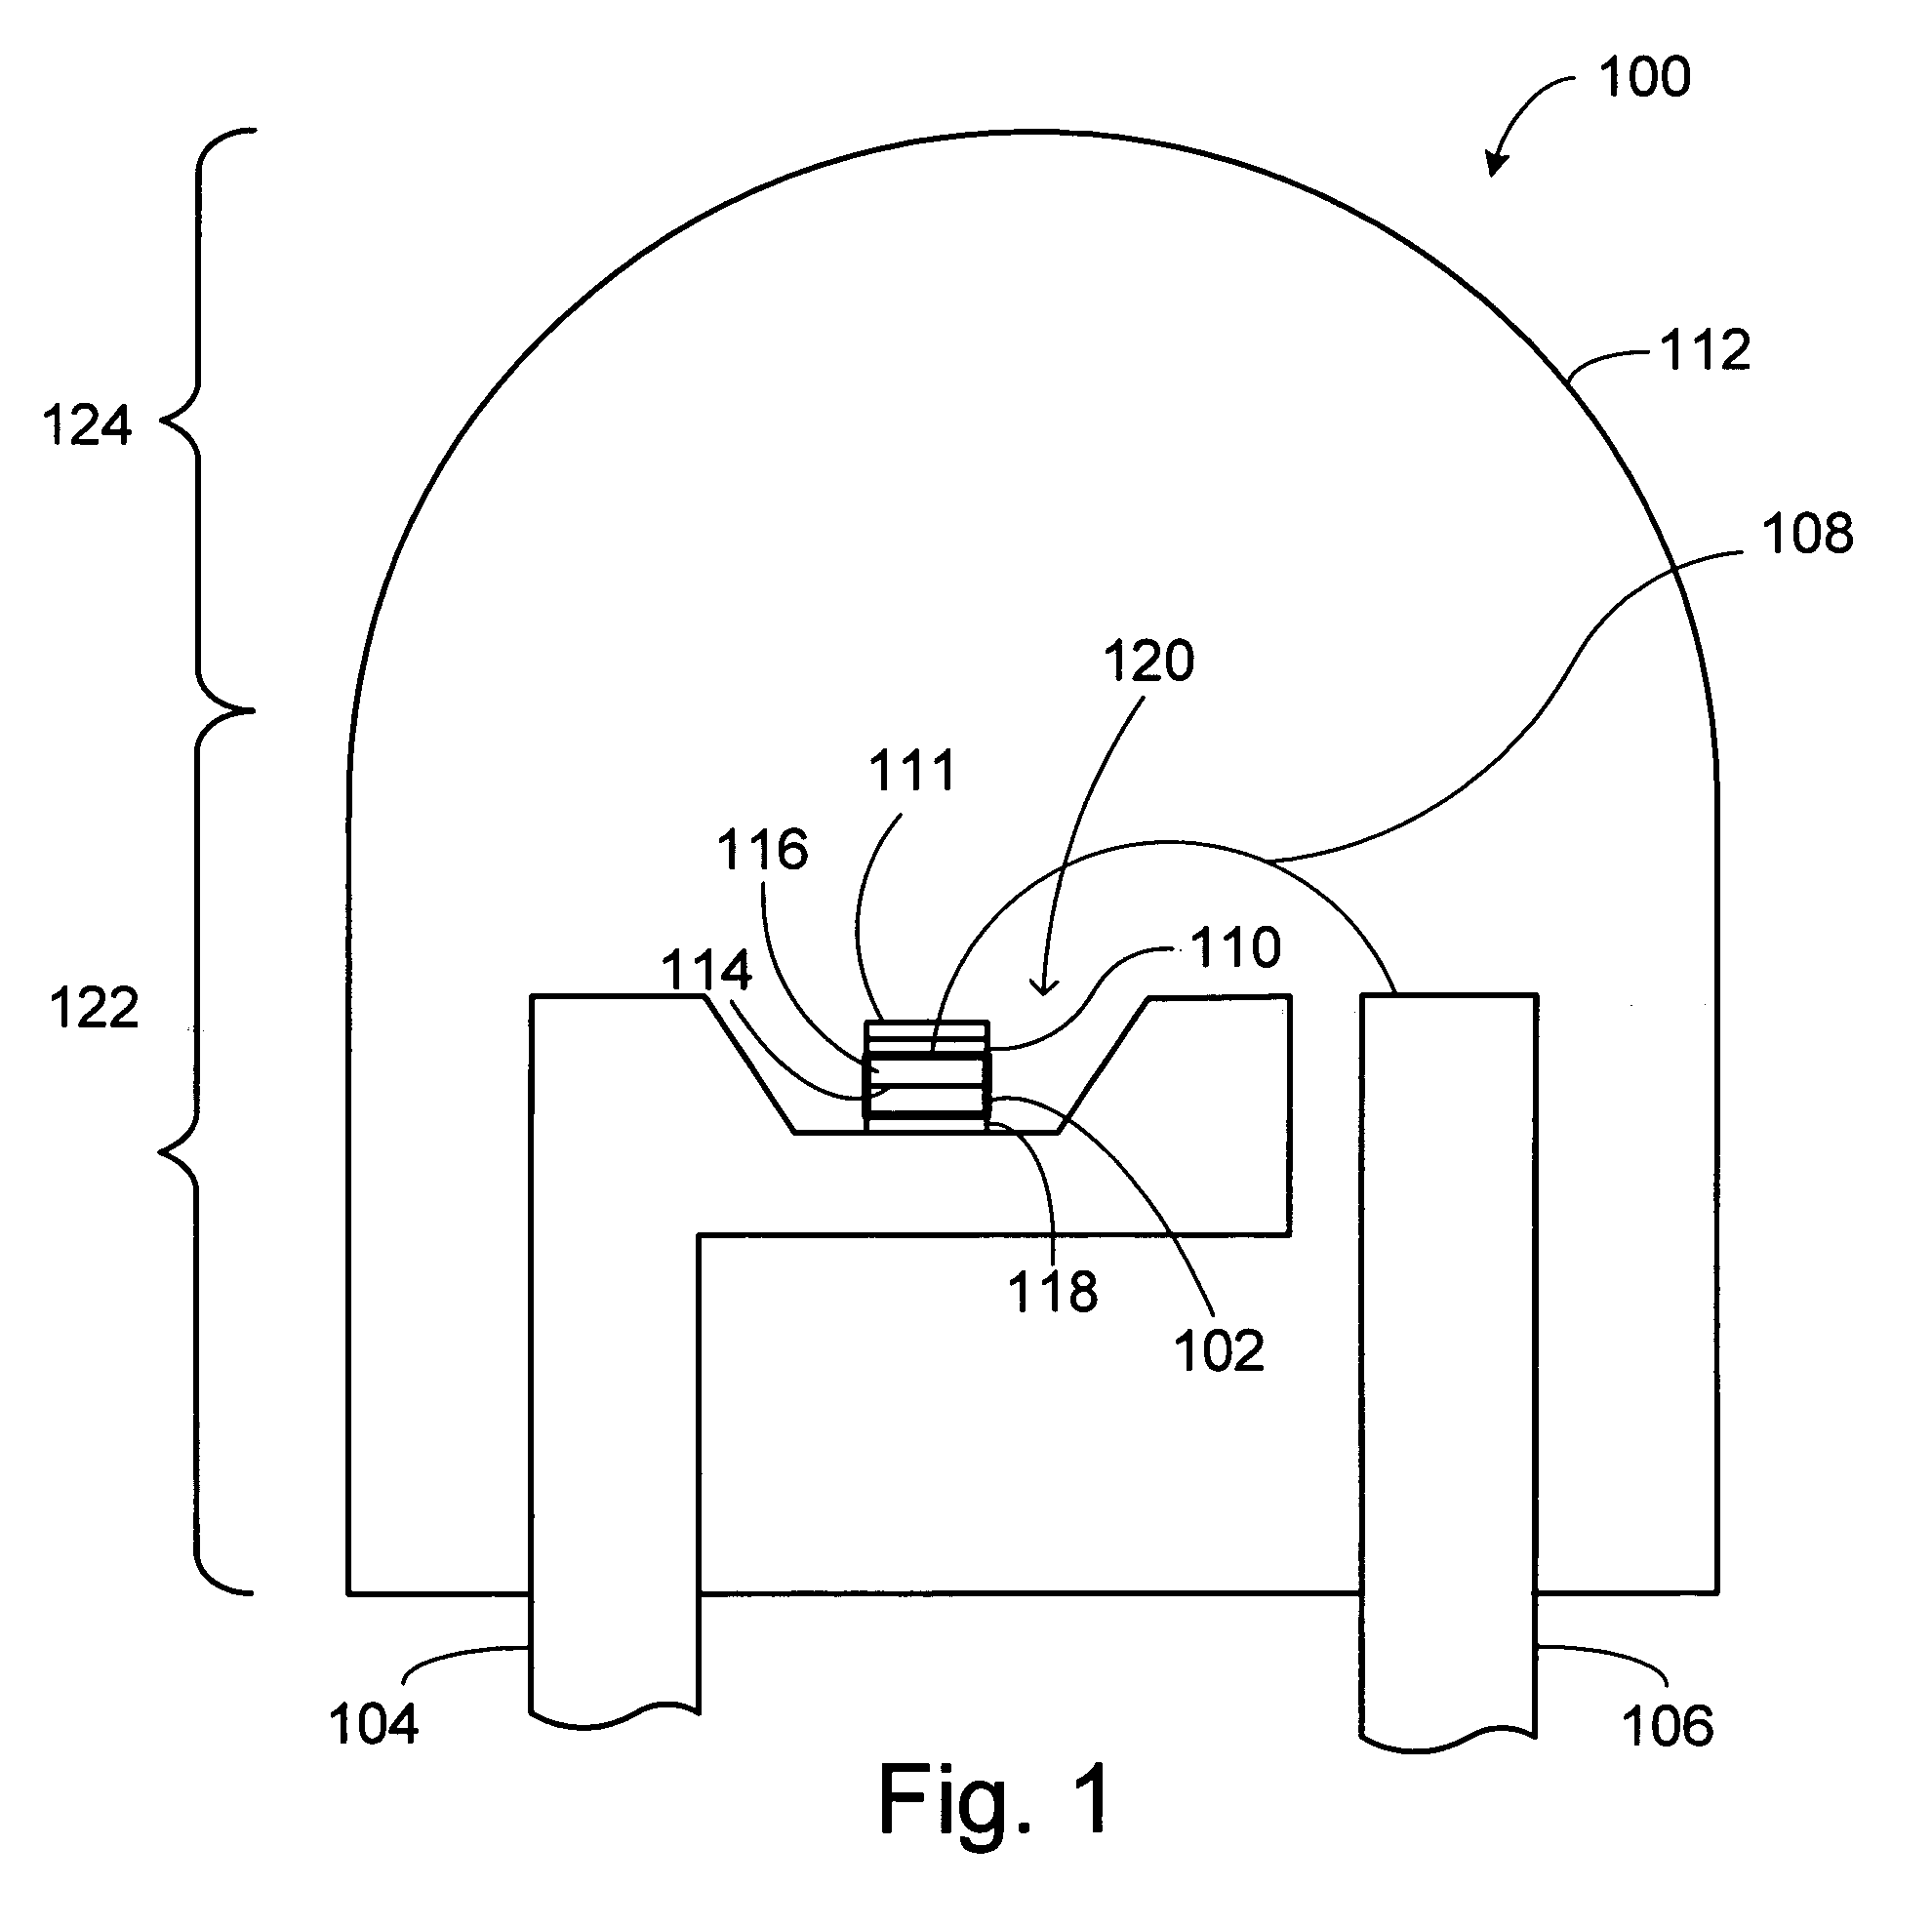 Light emitting device having a layer of photonic crystals and a region of diffusing material and method for fabricating the device